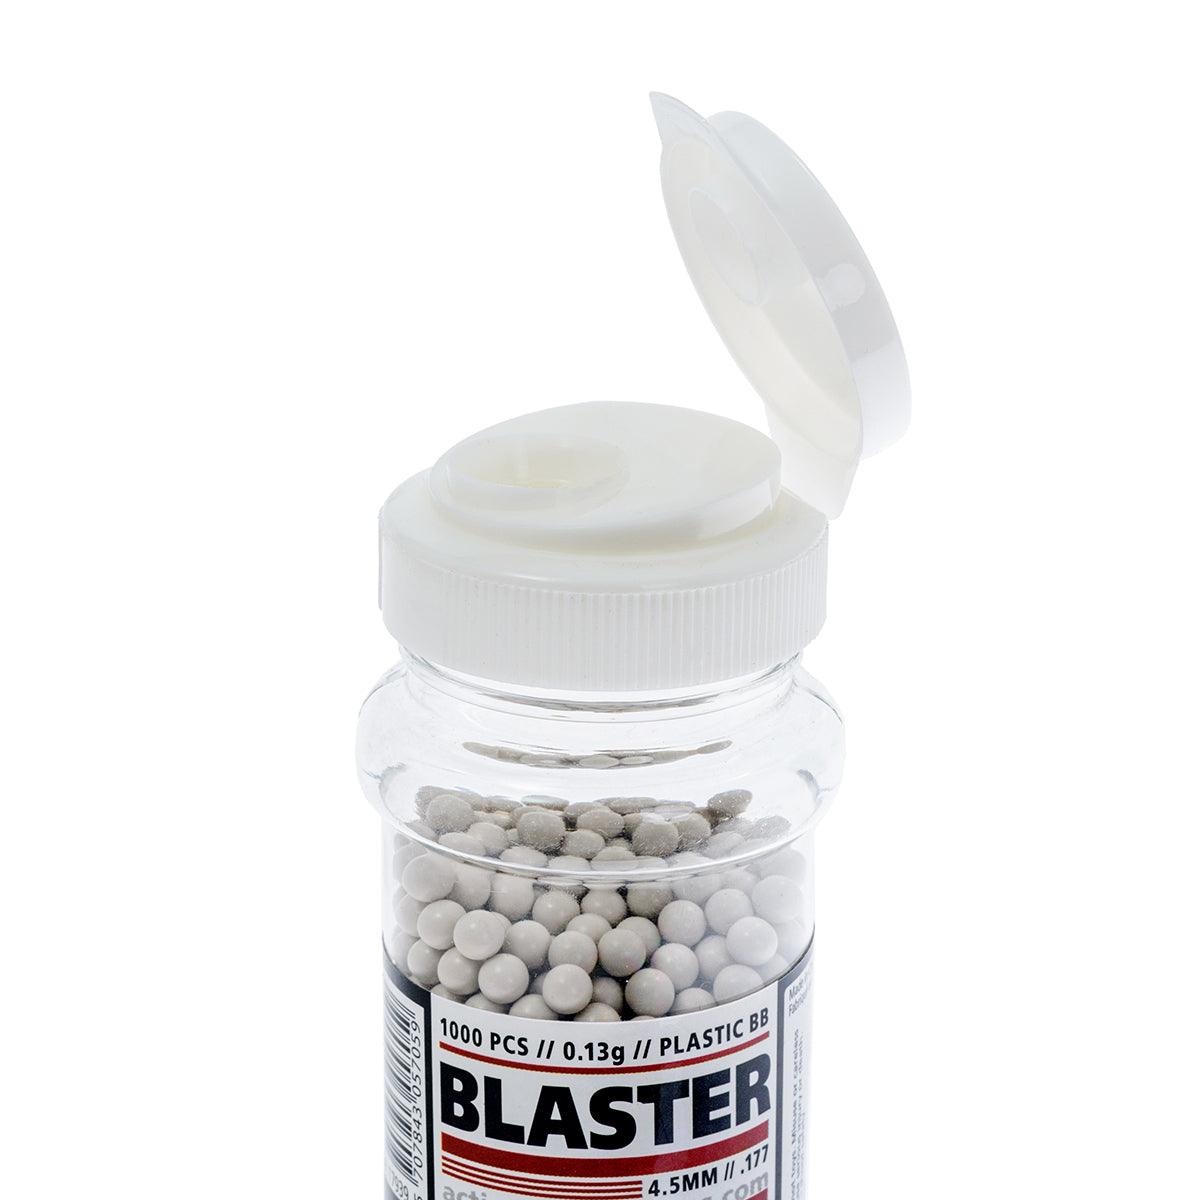 ASG 4.5MM BLASTER PLASTIC BB'S - 1000'S - NeonSales South Africa